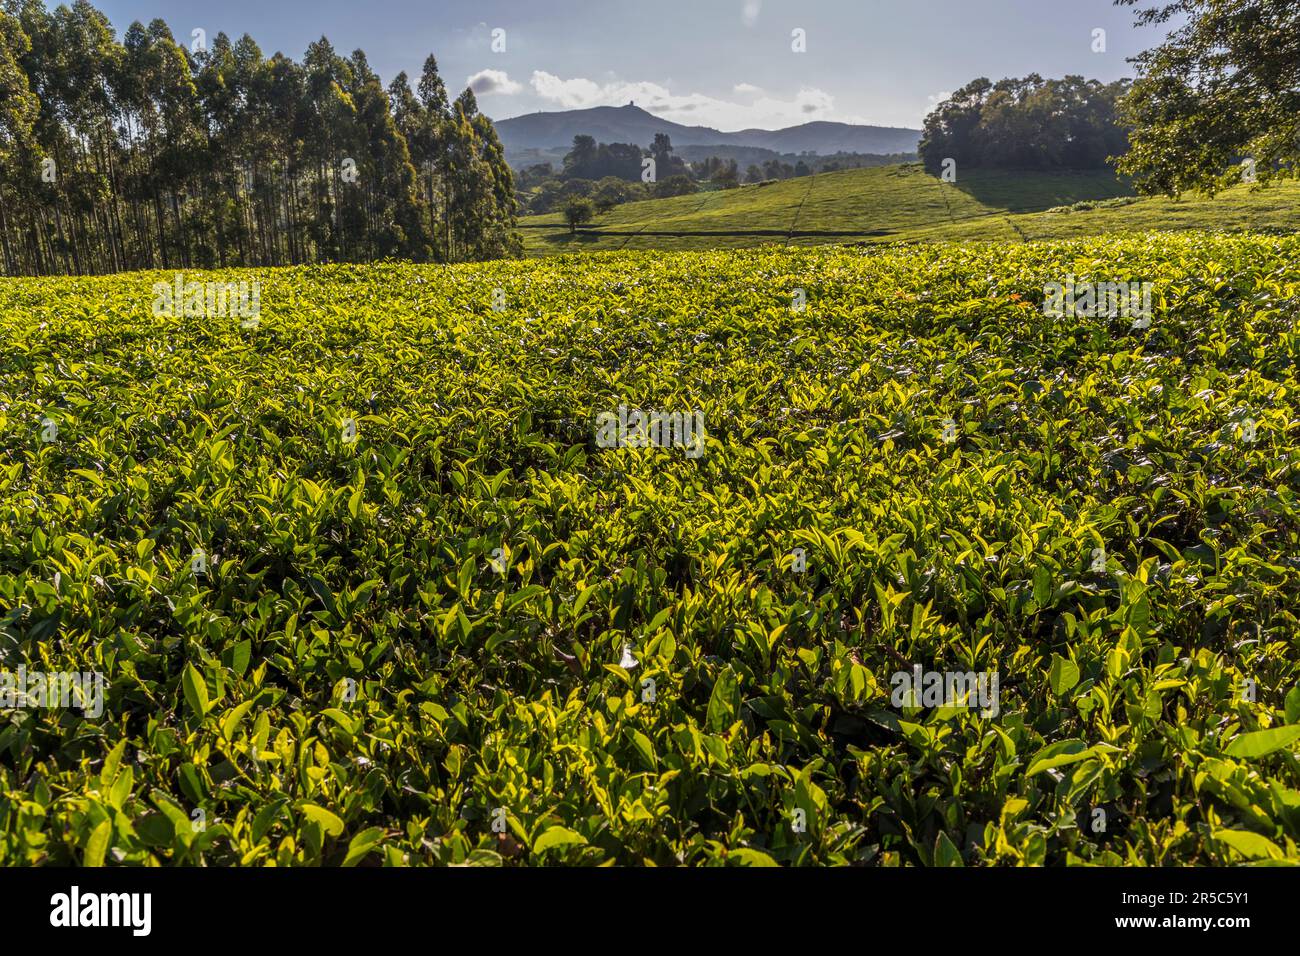 View over tea fields on Satemwa Estate. The plantation in the Shire Highlands comprises around 900 hectares of tea fields and 50 hectares of coffee fields, Thyolo, Malawi. Satemwa tea and coffee plantation near Thyolo, Malawi Stock Photo